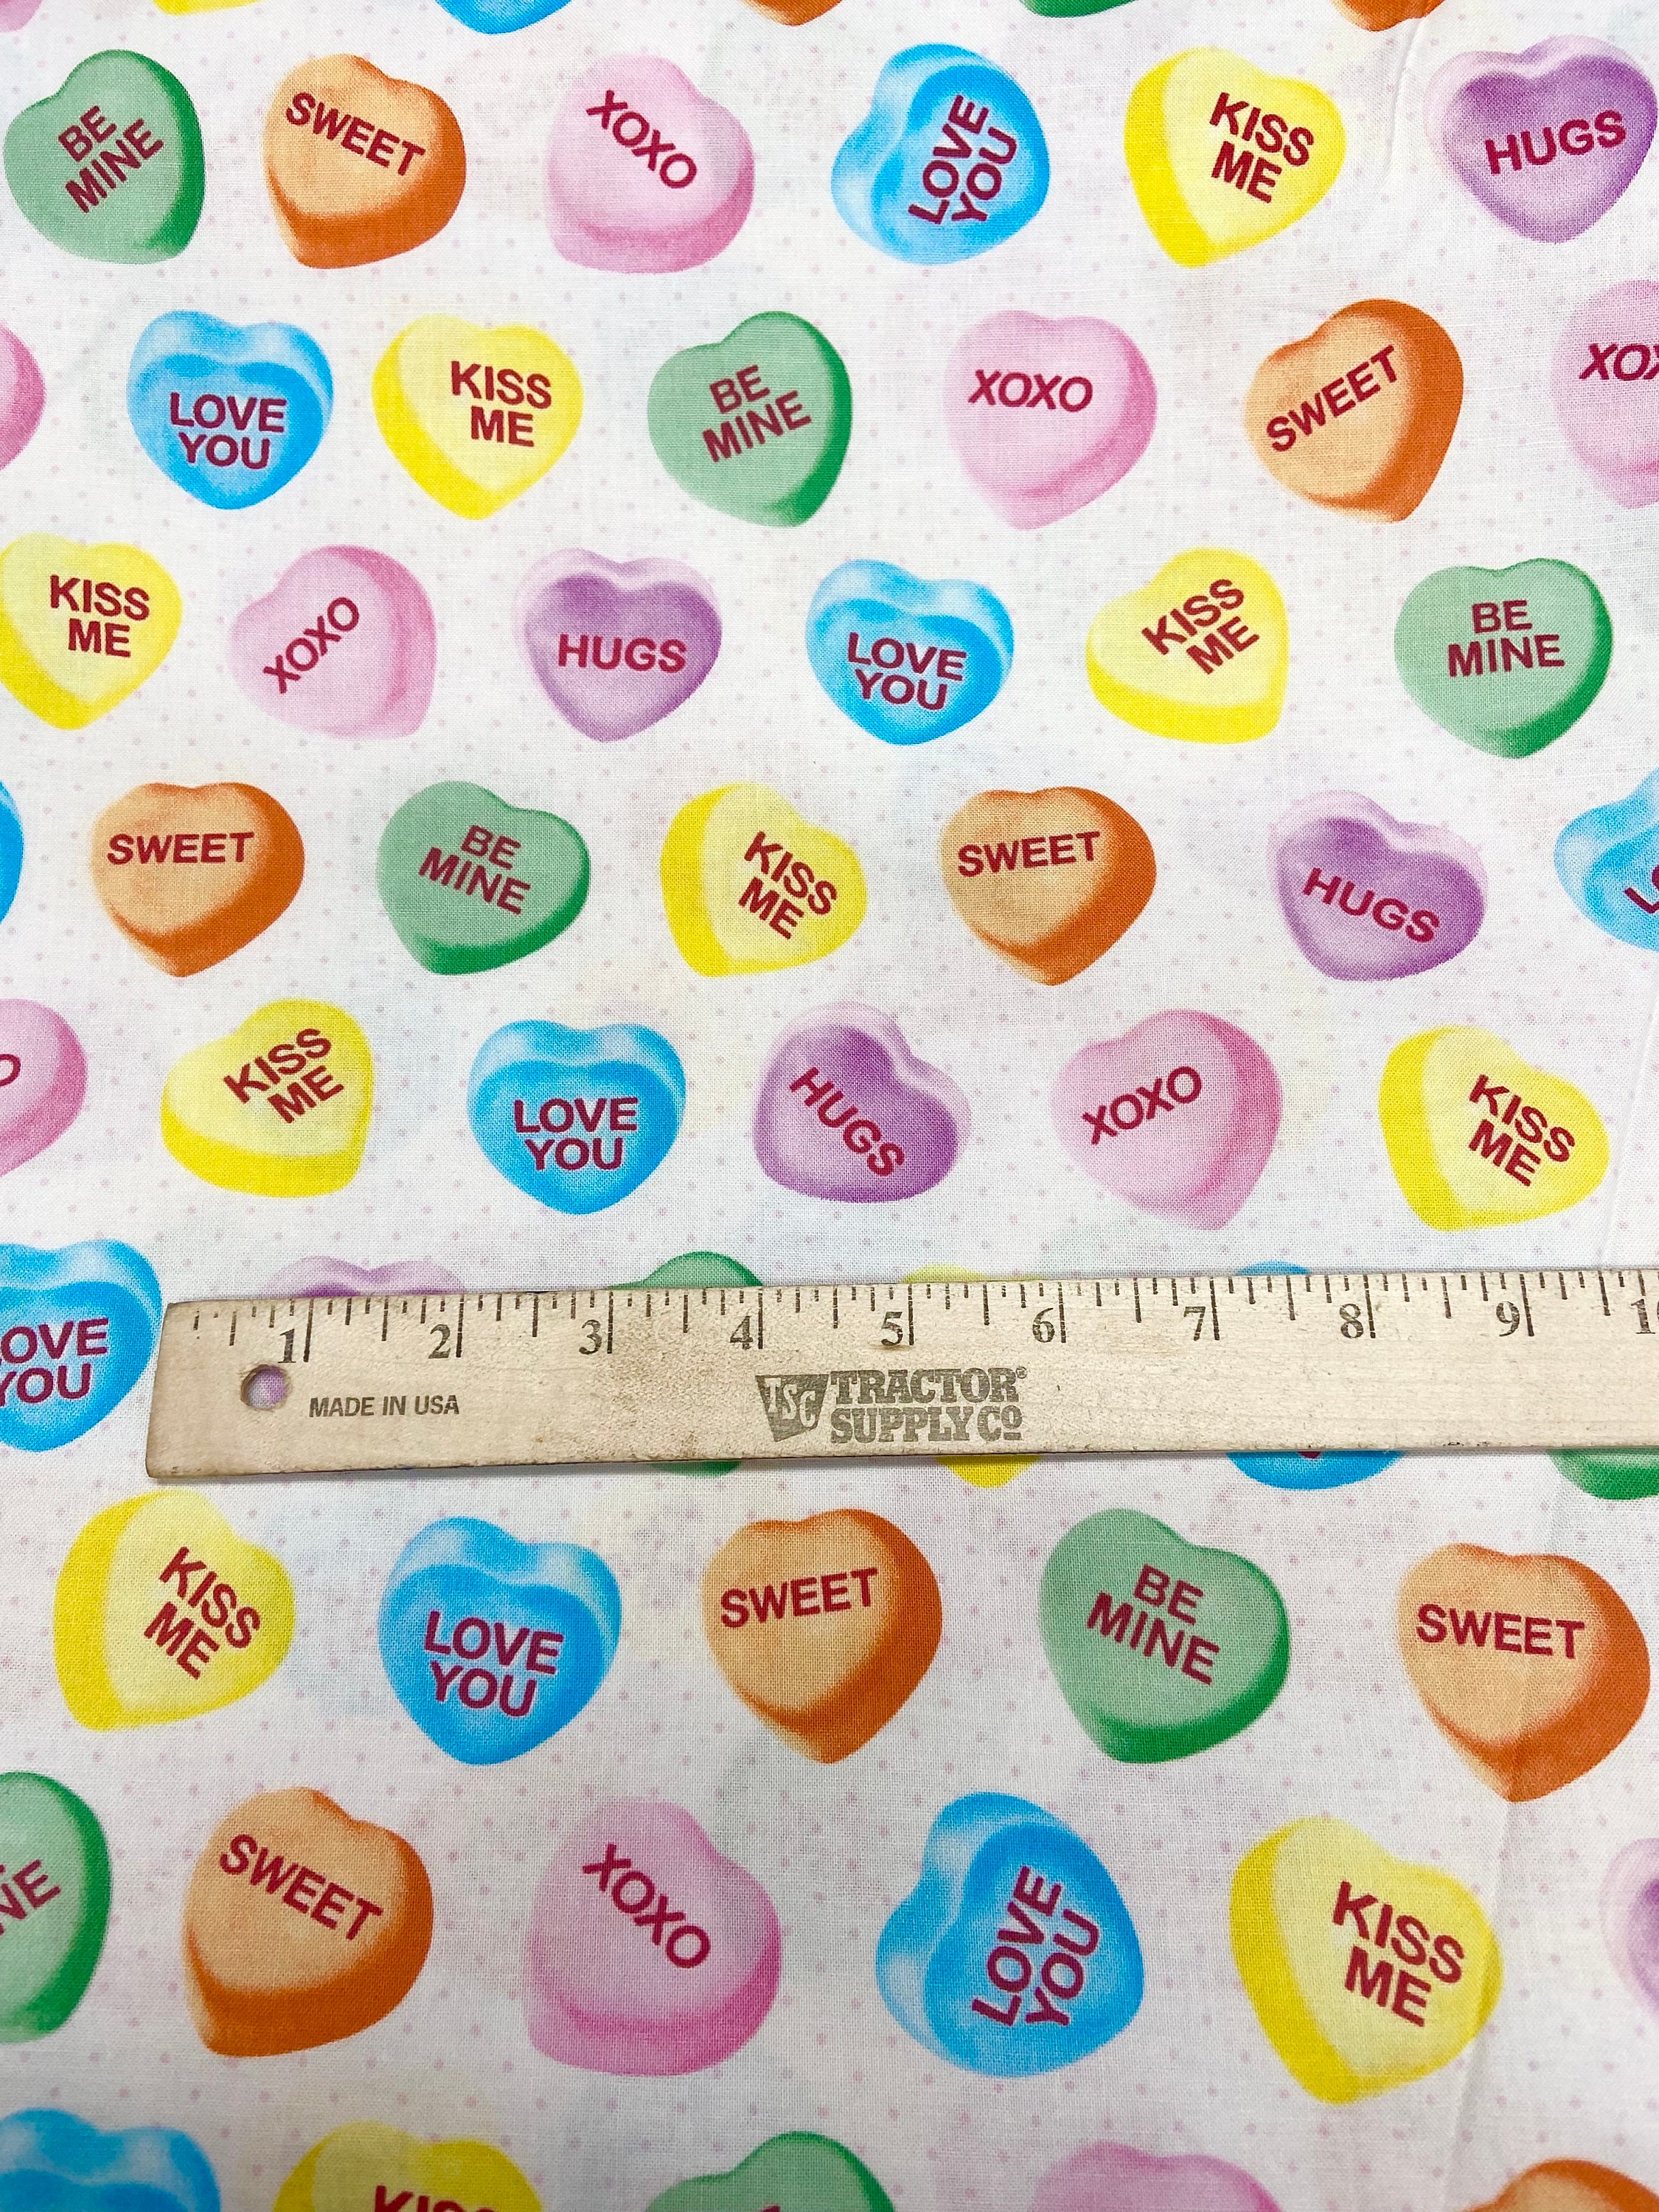 LARGE Conversation Hearts, Wood Sweetheart Candy Decor With CARVED Words  listing for Individual Hearts, Sold Each 